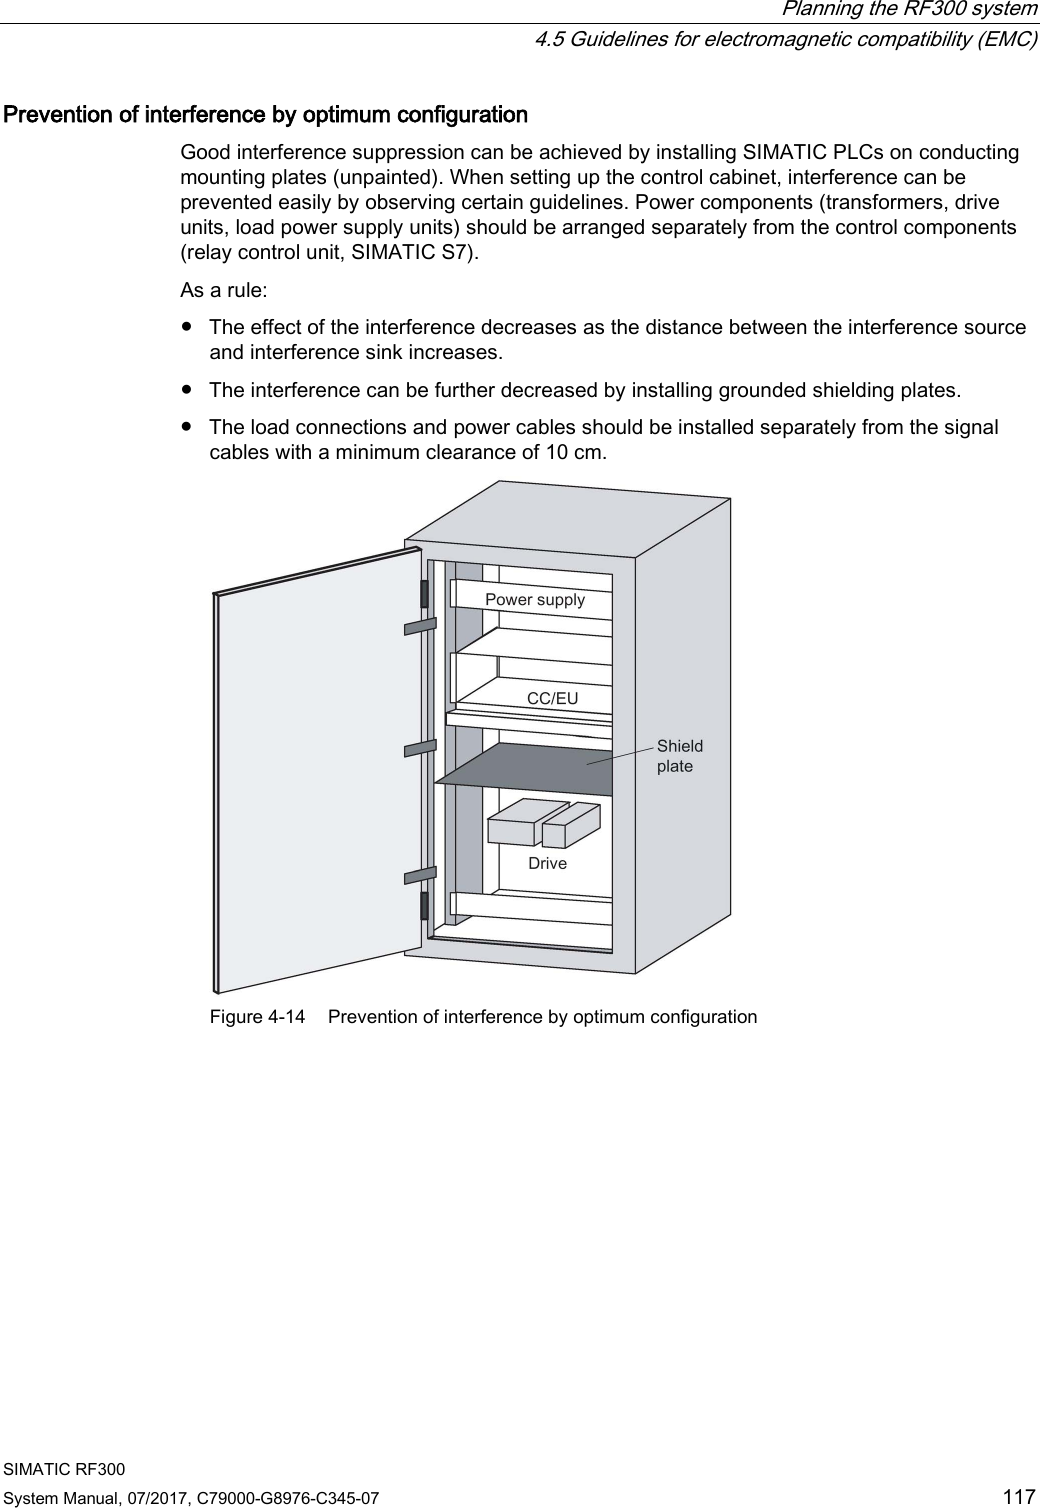  Planning the RF300 system  4.5 Guidelines for electromagnetic compatibility (EMC) SIMATIC RF300 System Manual, 07/2017, C79000-G8976-C345-07 117 Prevention of interference by optimum configuration Good interference suppression can be achieved by installing SIMATIC PLCs on conducting mounting plates (unpainted). When setting up the control cabinet, interference can be prevented easily by observing certain guidelines. Power components (transformers, drive units, load power supply units) should be arranged separately from the control components (relay control unit, SIMATIC S7). As a rule: ● The effect of the interference decreases as the distance between the interference source and interference sink increases. ● The interference can be further decreased by installing grounded shielding plates. ● The load connections and power cables should be installed separately from the signal cables with a minimum clearance of 10 cm.  Figure 4-14 Prevention of interference by optimum configuration 